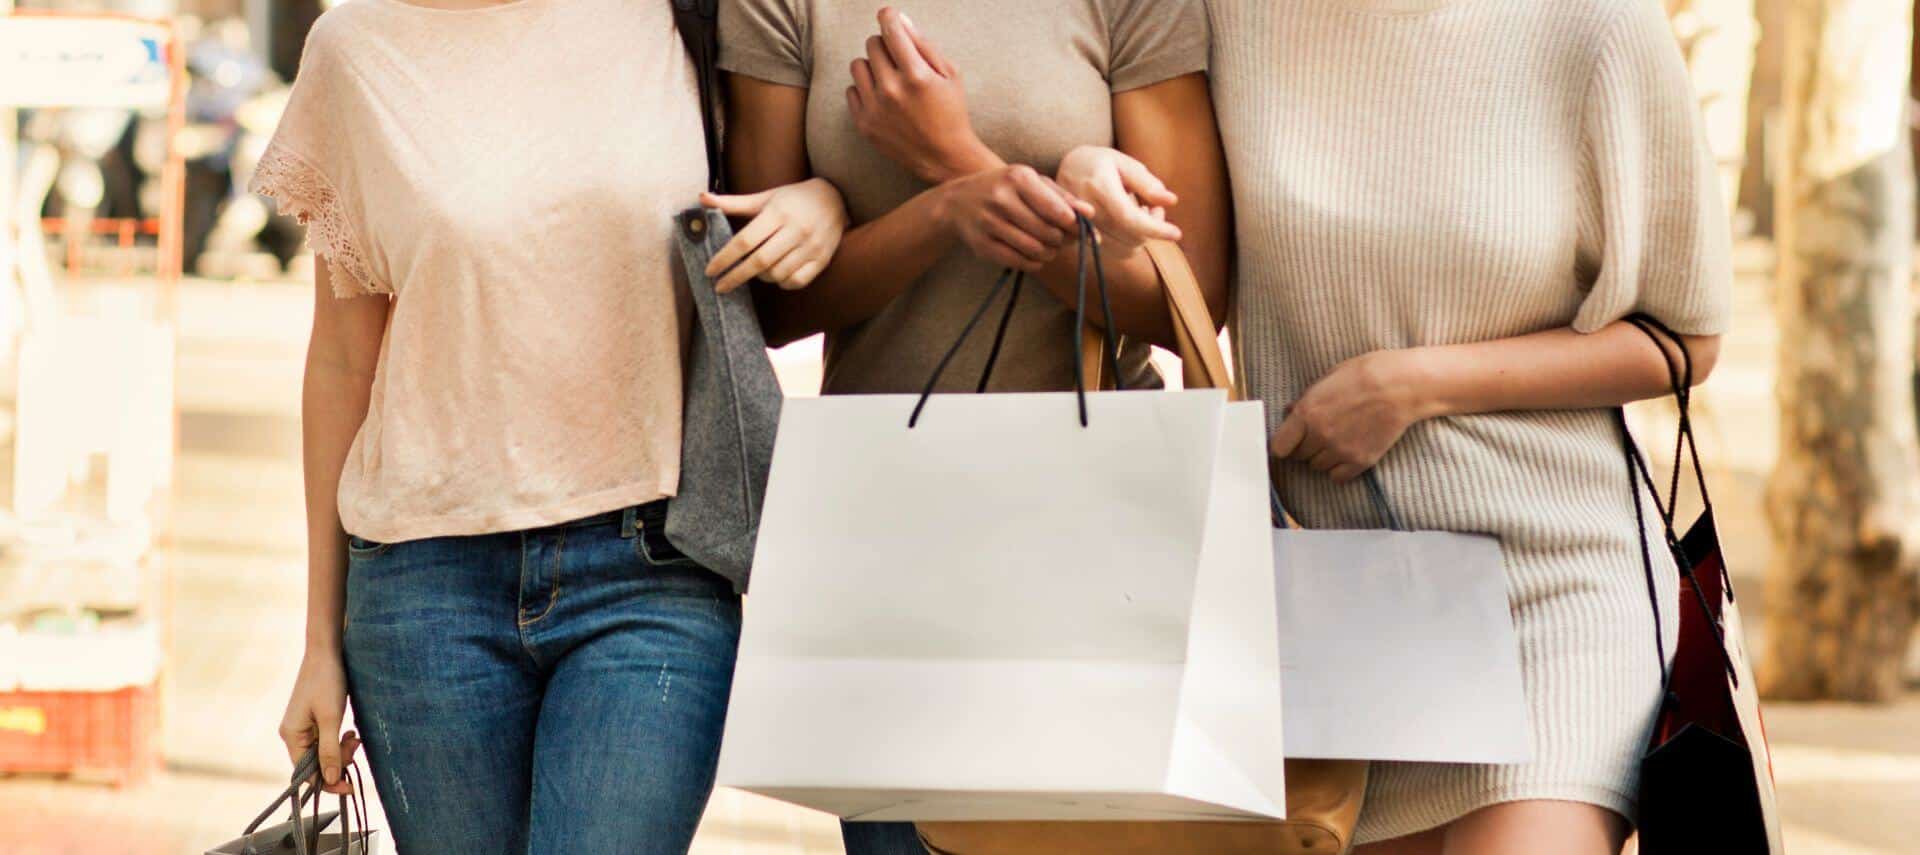 Three women in a shopping plaza holding shopping bags